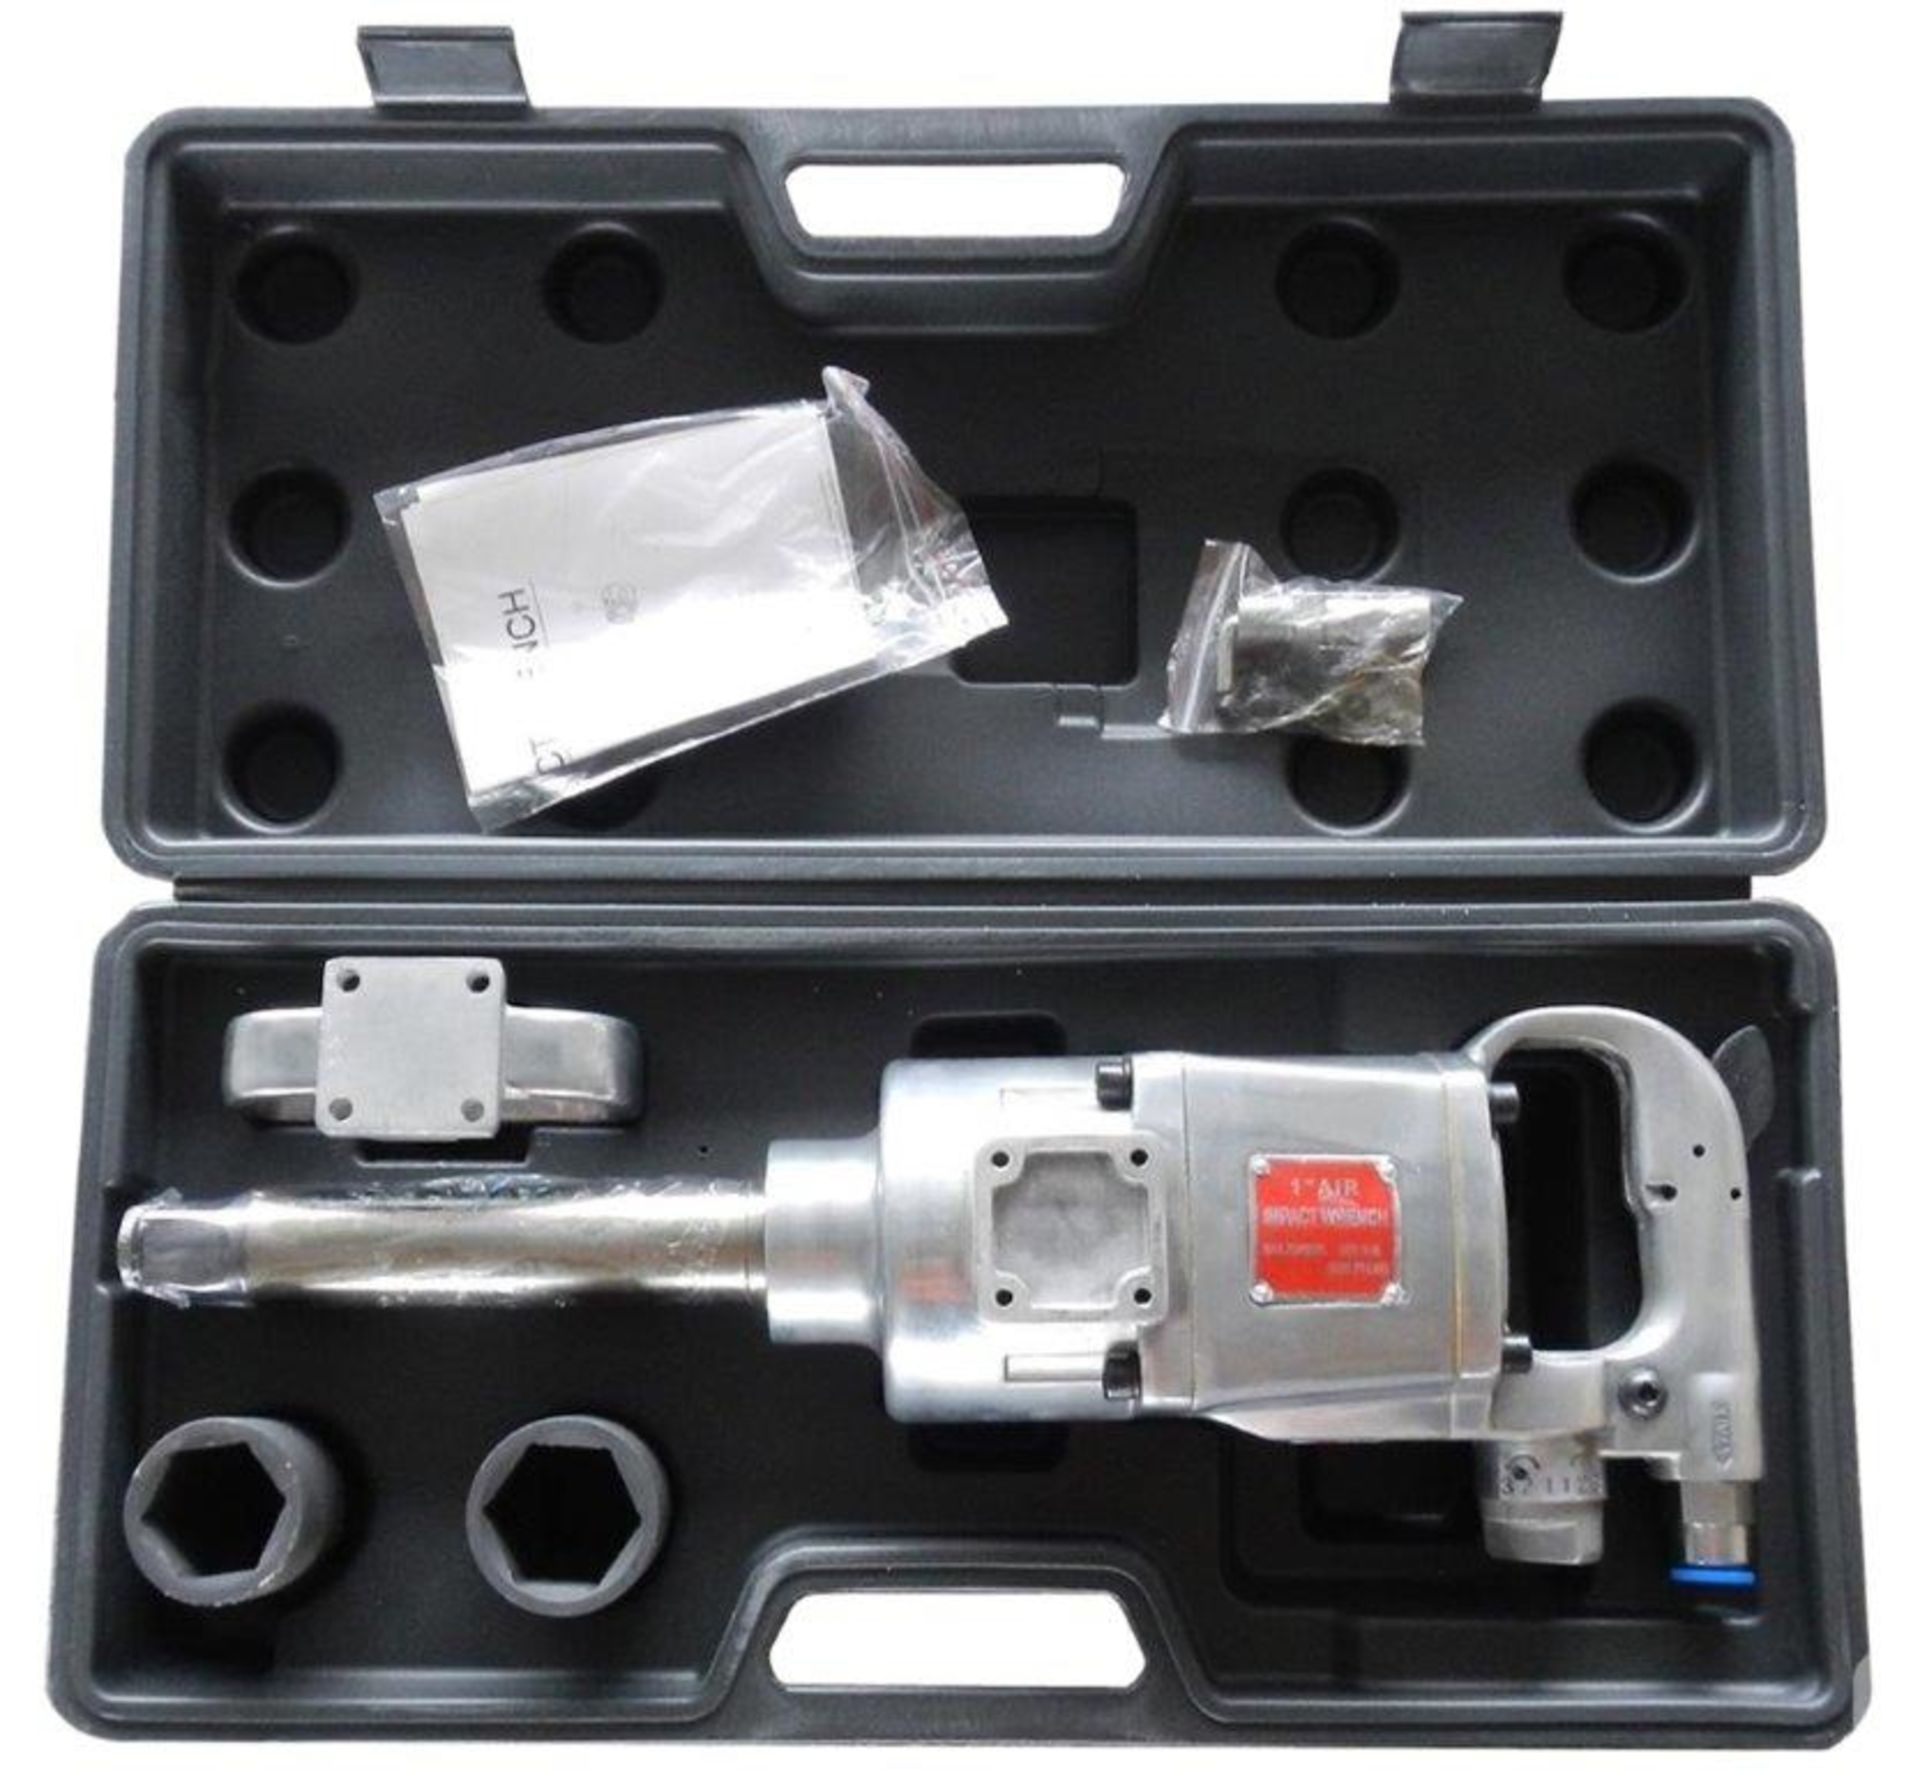 "NEW" 1" Impact Wrench Kit- MFR - DR 1" No-Load Speed - 4,200 Rpm Air Inlet - 1/2" Working PSI -